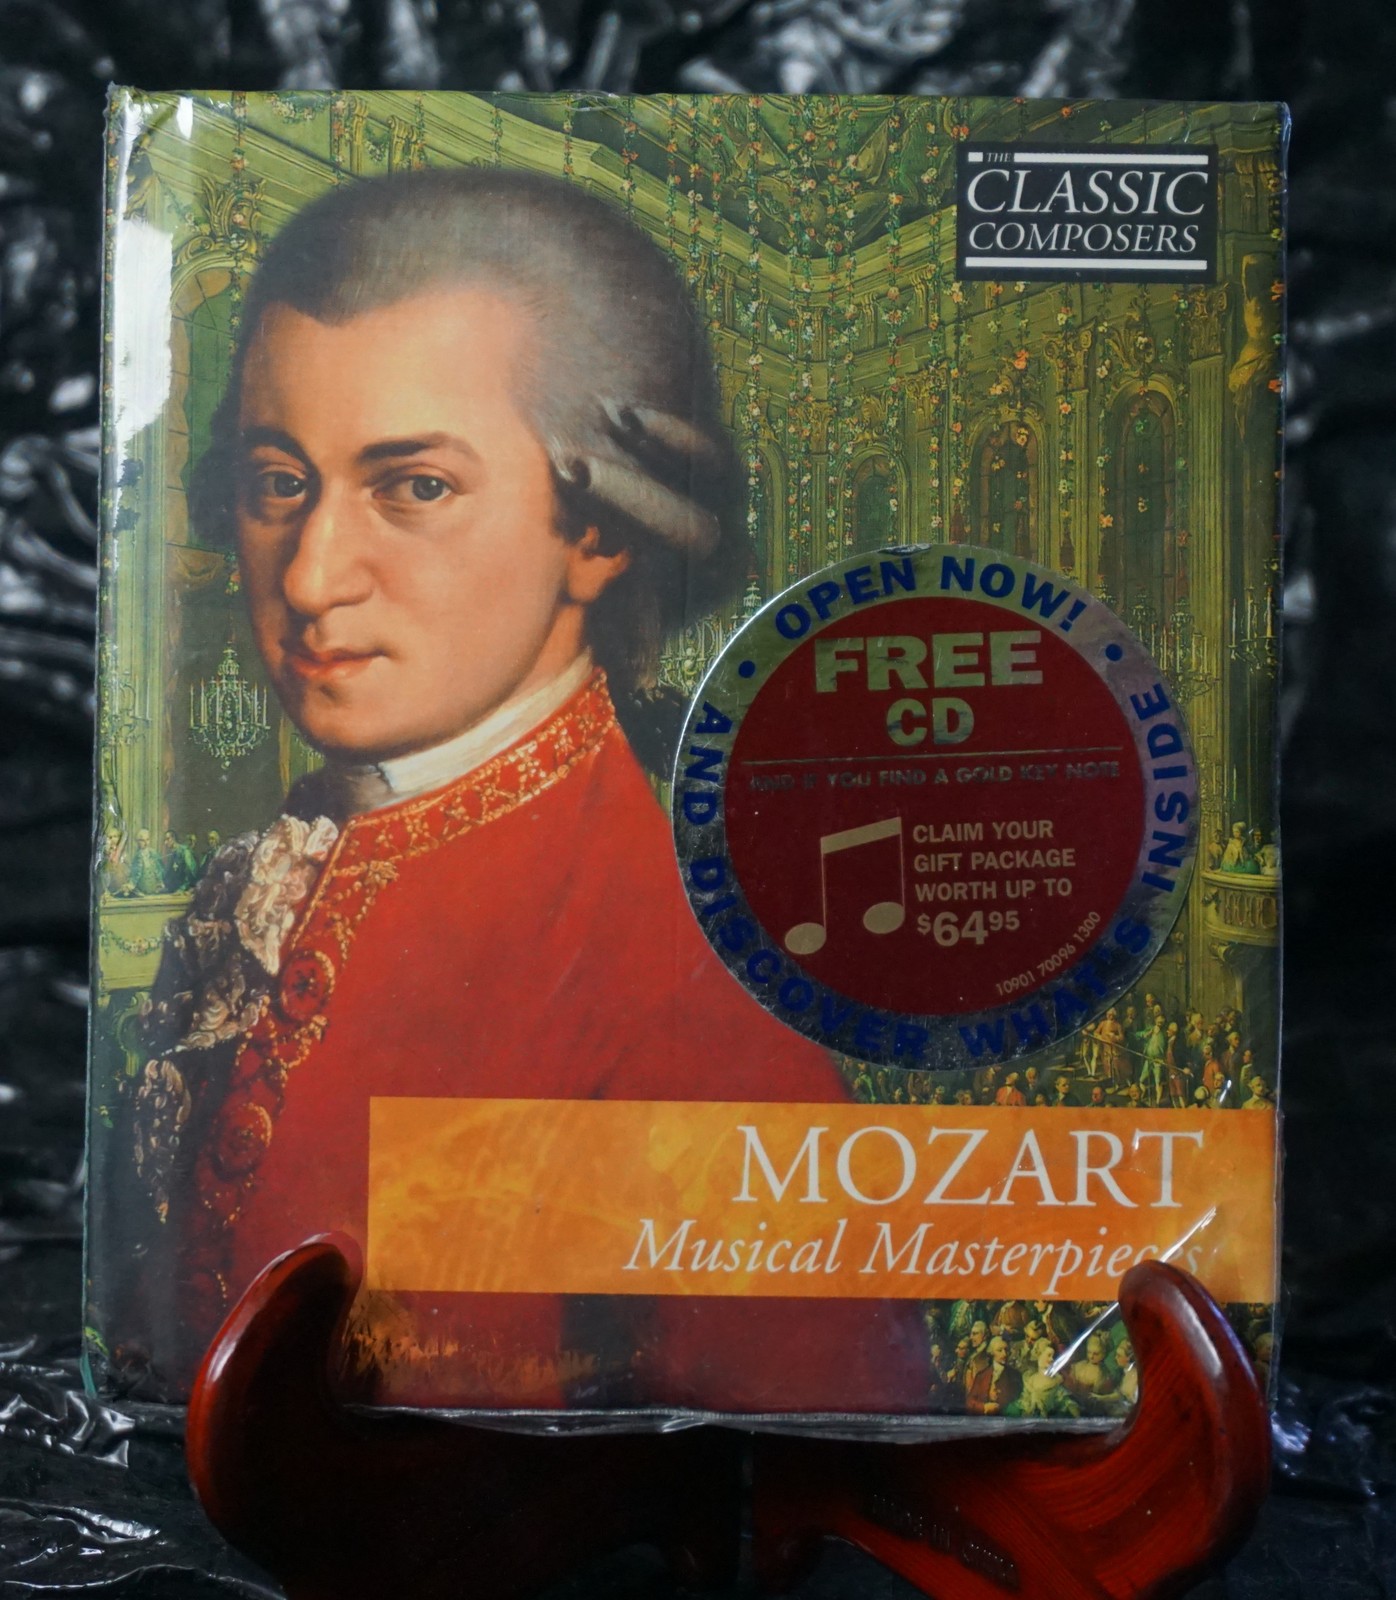 Mozart: Musical Masterpieces (CD, Classic Composers) - STILL SEALED - Book  & CD